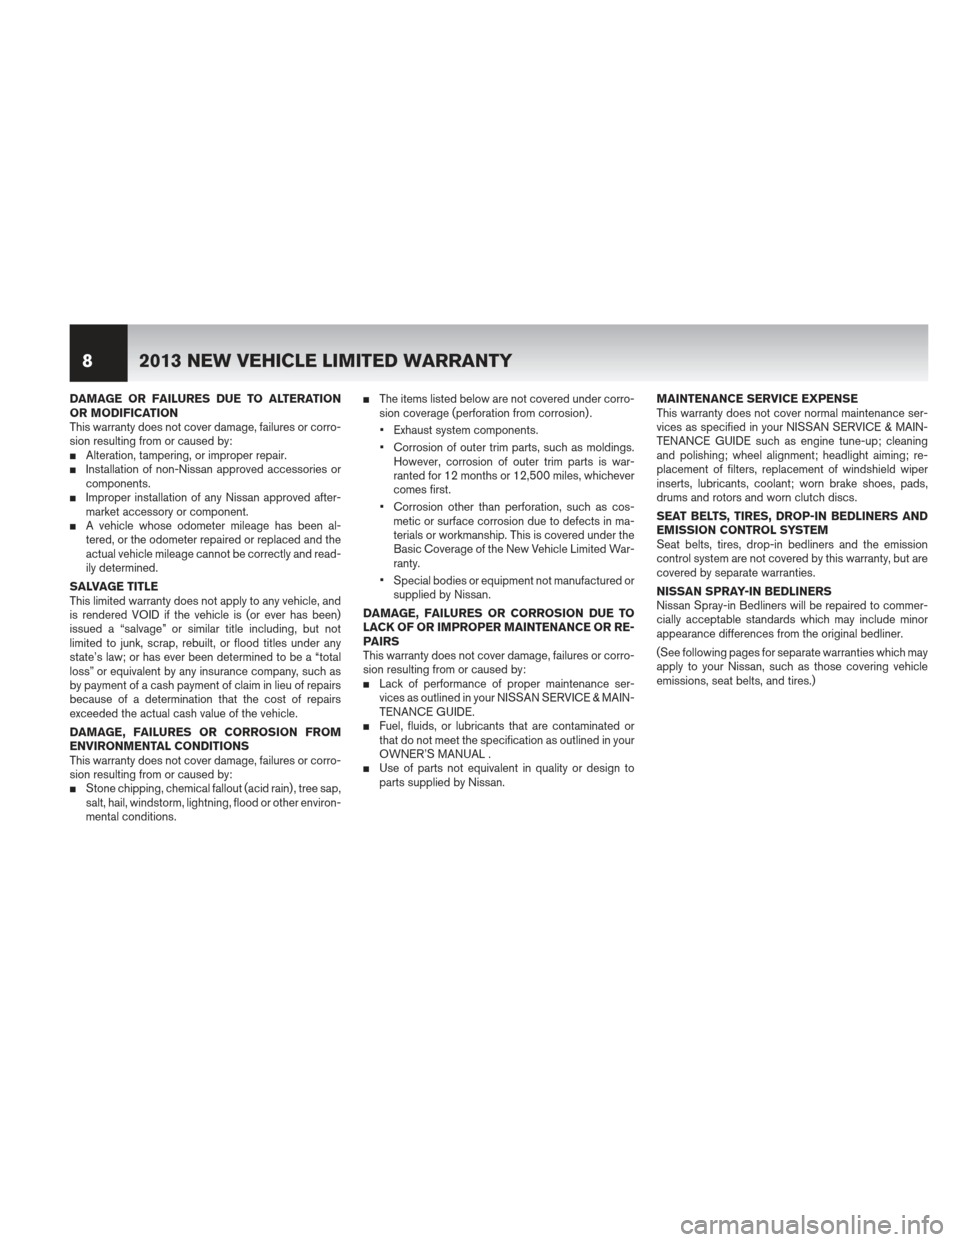 NISSAN TITAN 2013 1.G Warranty Booklet DAMAGE OR FAILURES DUE TO ALTERATION
OR MODIFICATION
This warranty does not cover damage, failures or corro-
sion resulting from or caused by:
Alteration, tampering, or improper repair.Installation 